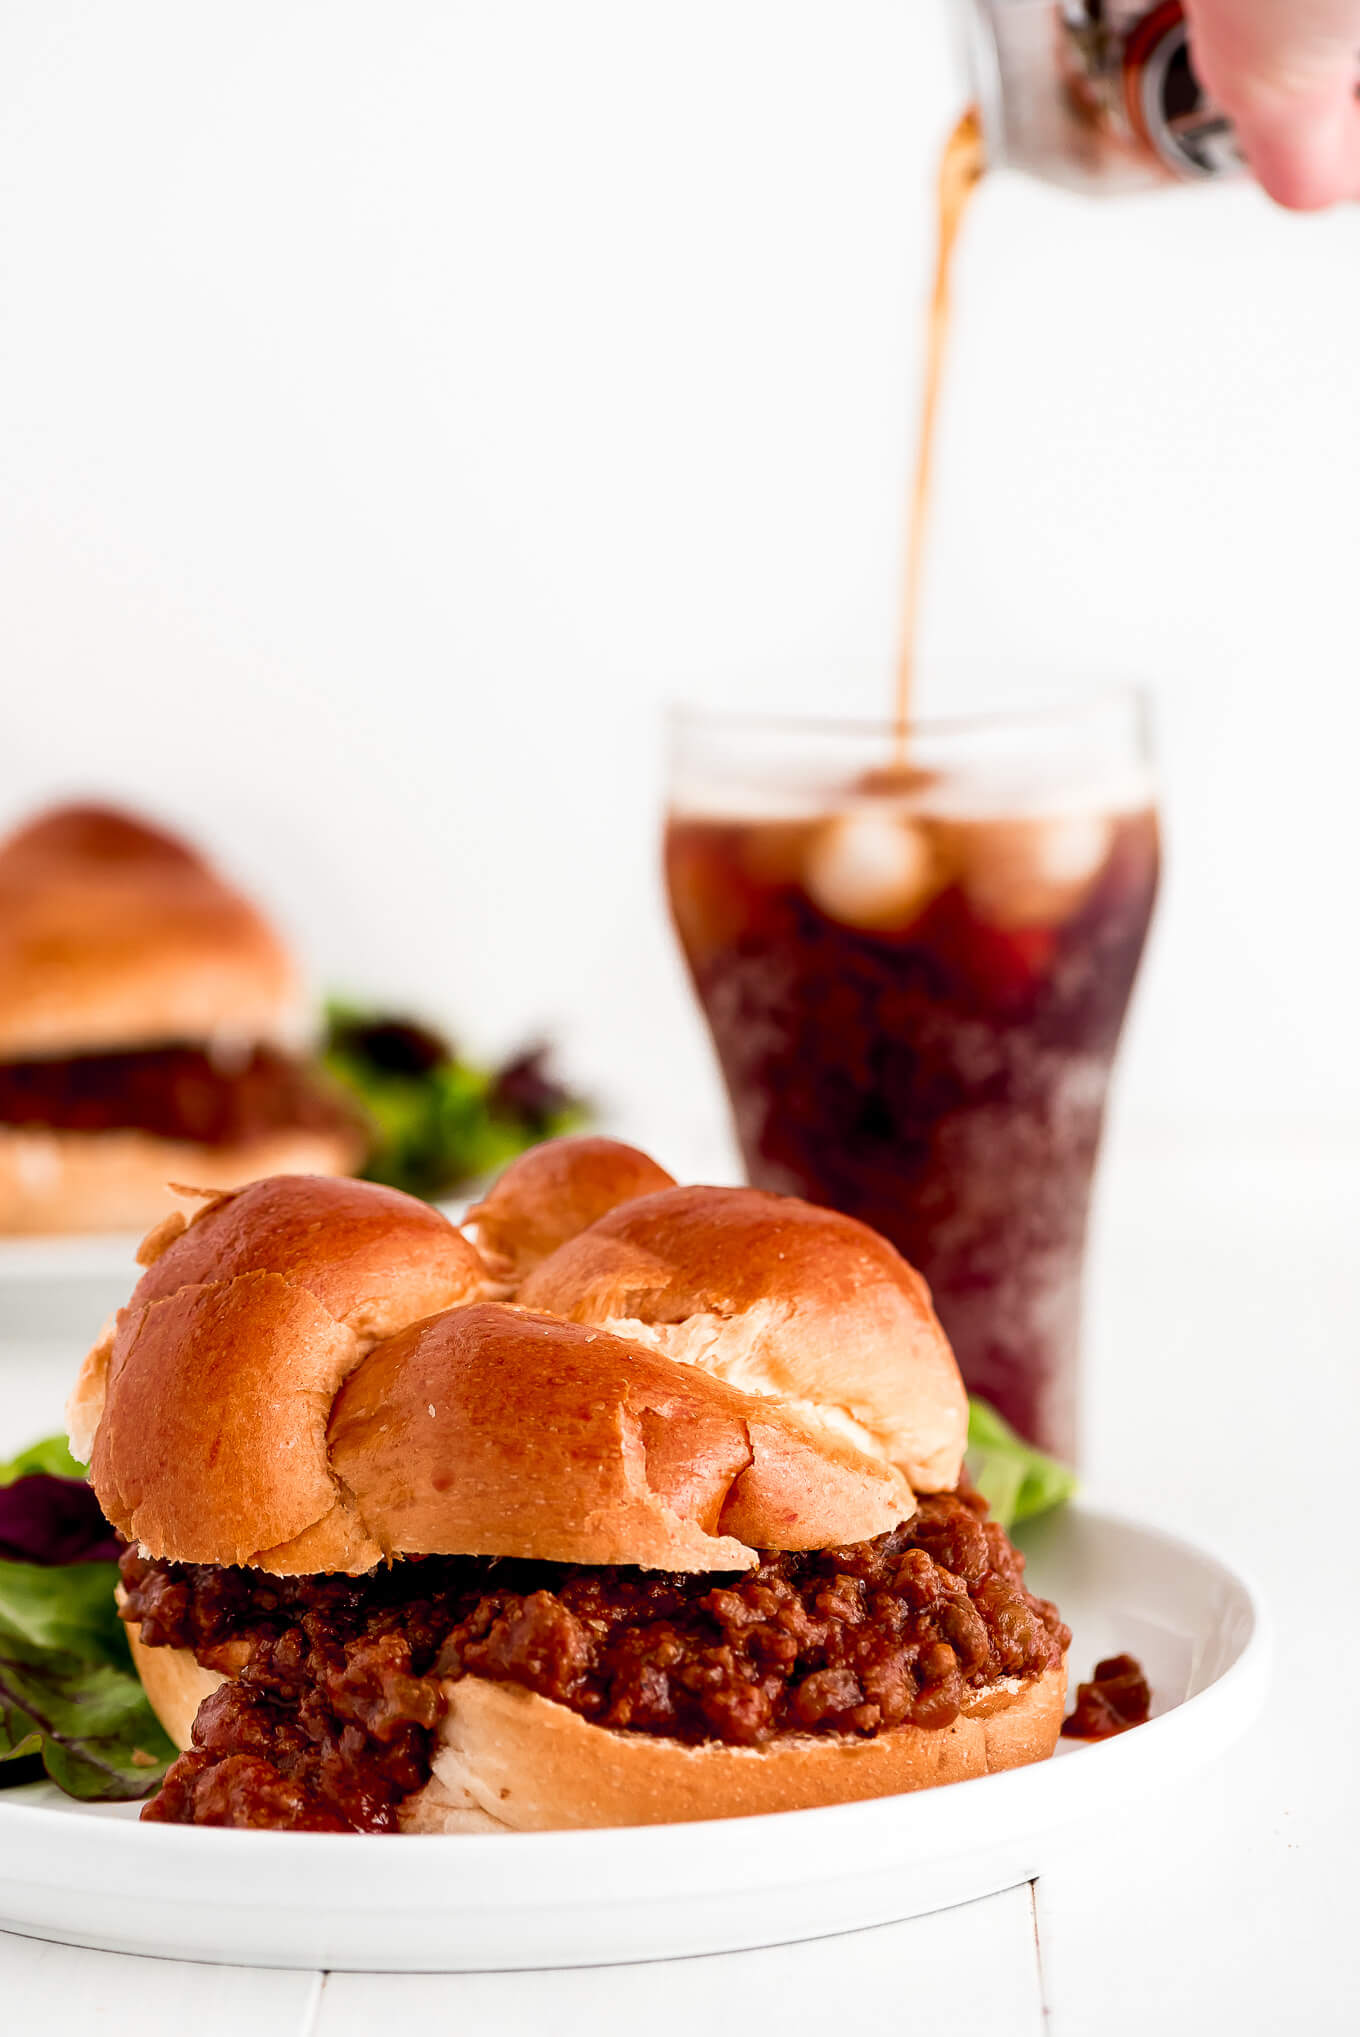 Sloppy Joes made with challah buns on plates with soda being poured into a glass in the background.